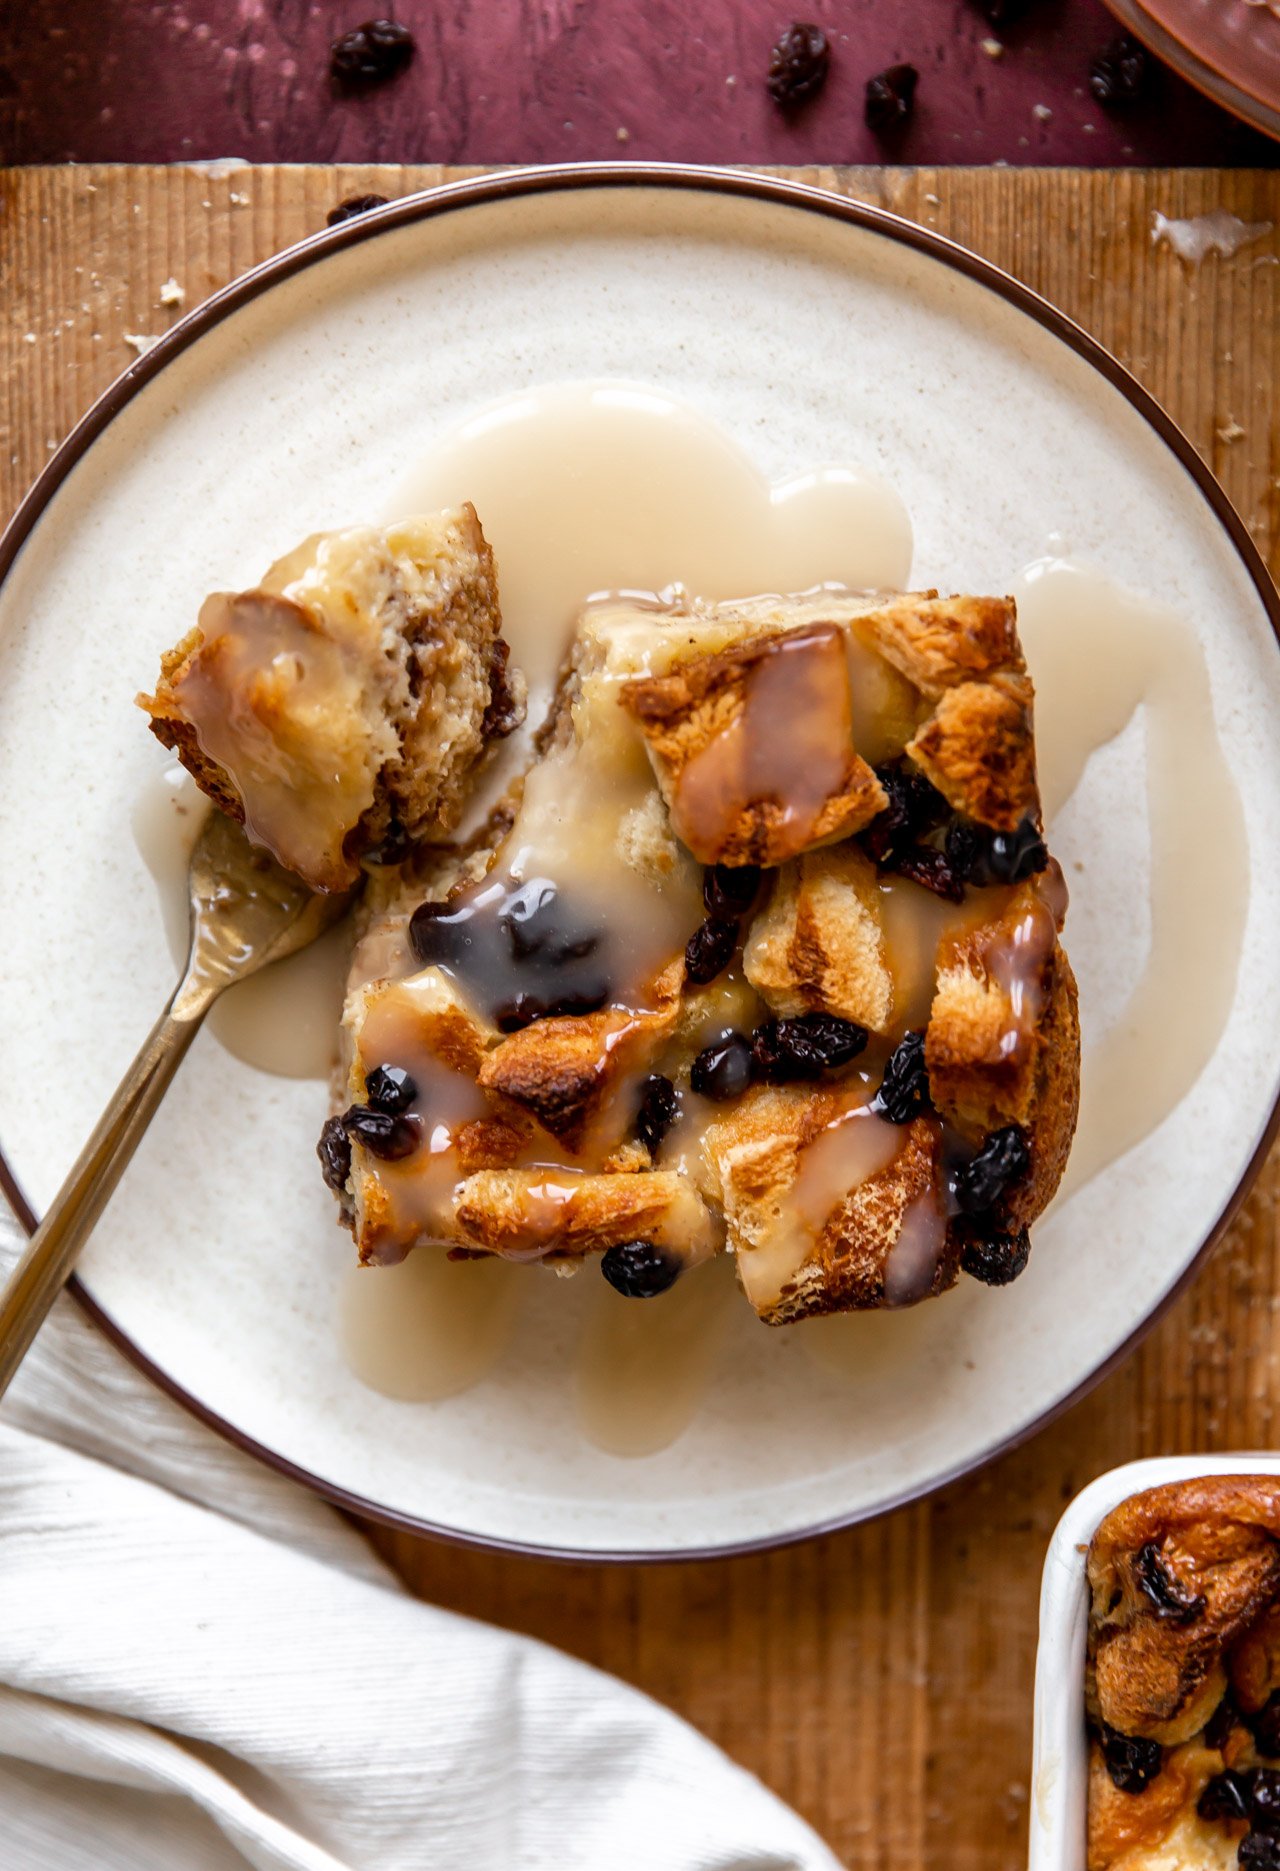 Overhead view of a plate with a serving of bread pudding.